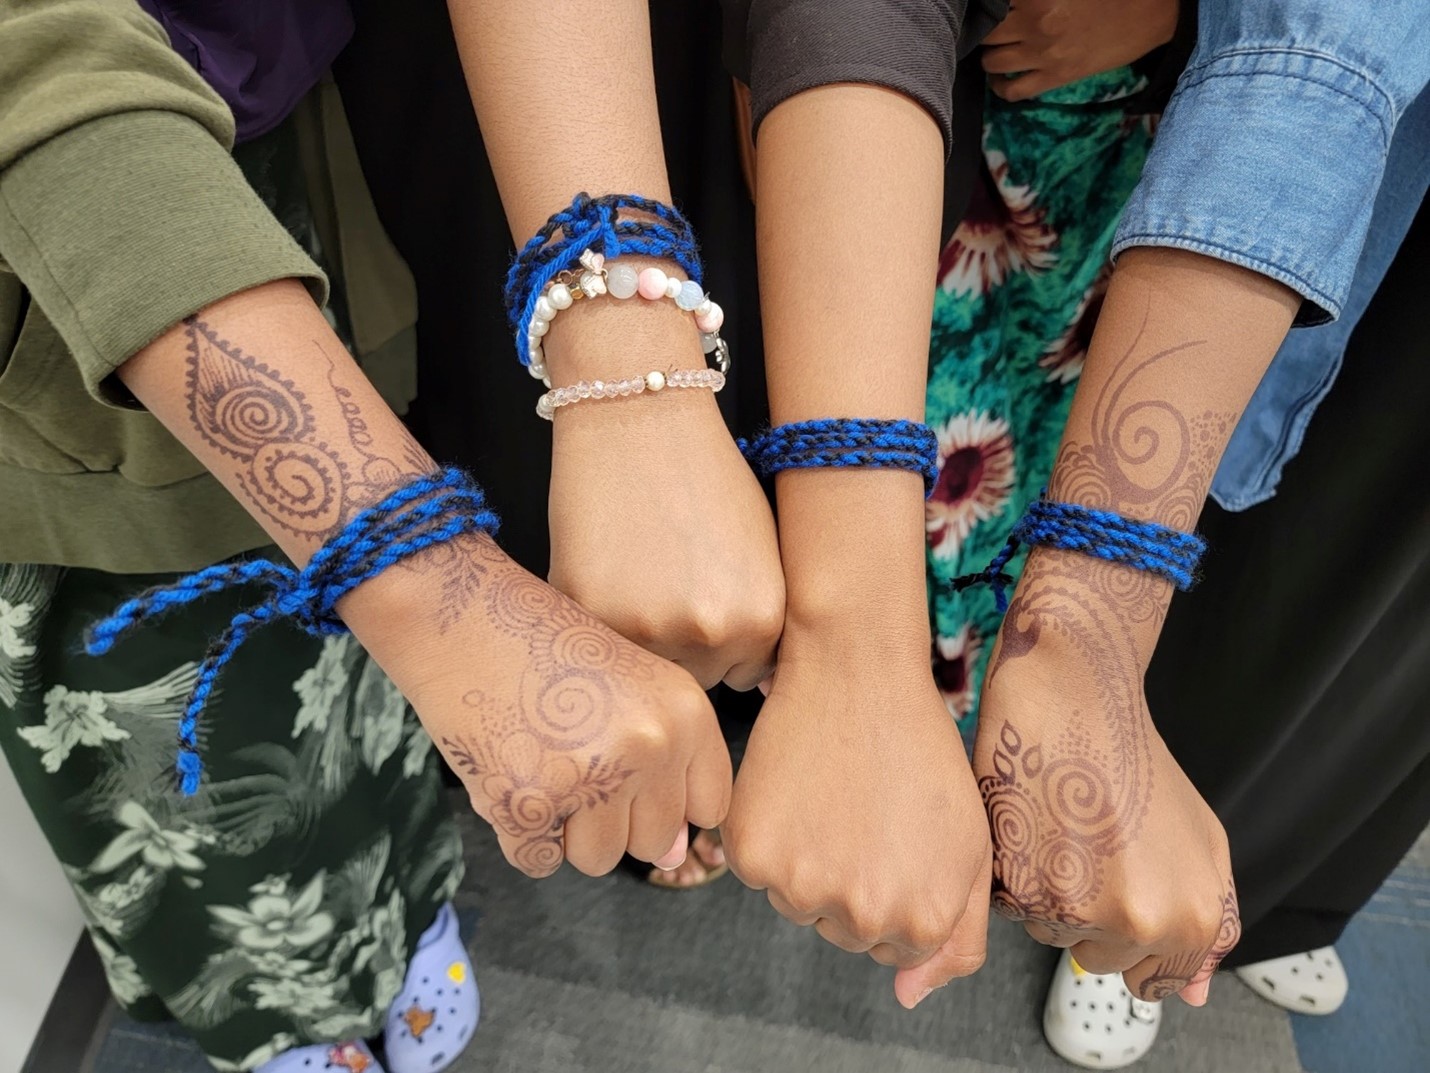 Closeup for four arms showing homemade bracelets and henna art.